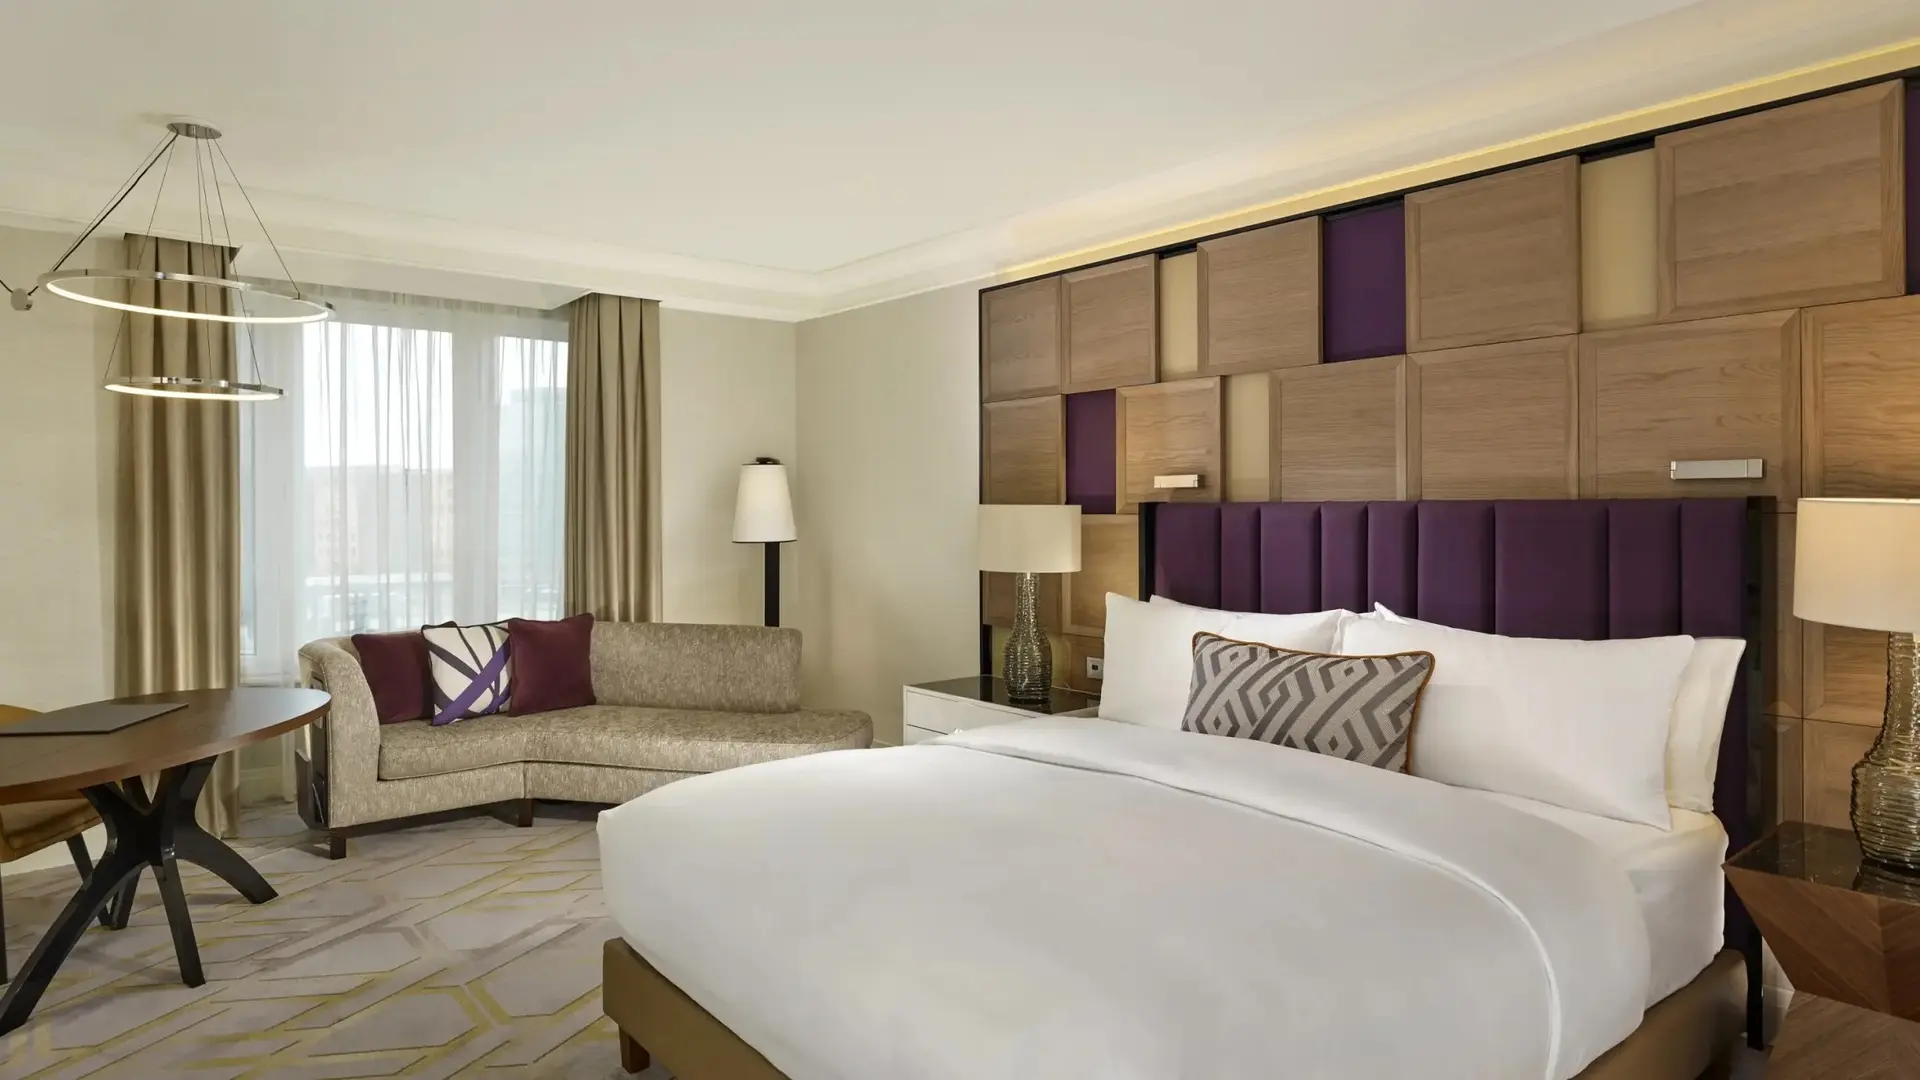 Hotel review Accommodation' - The Ritz-Carlton, Berlin - 0